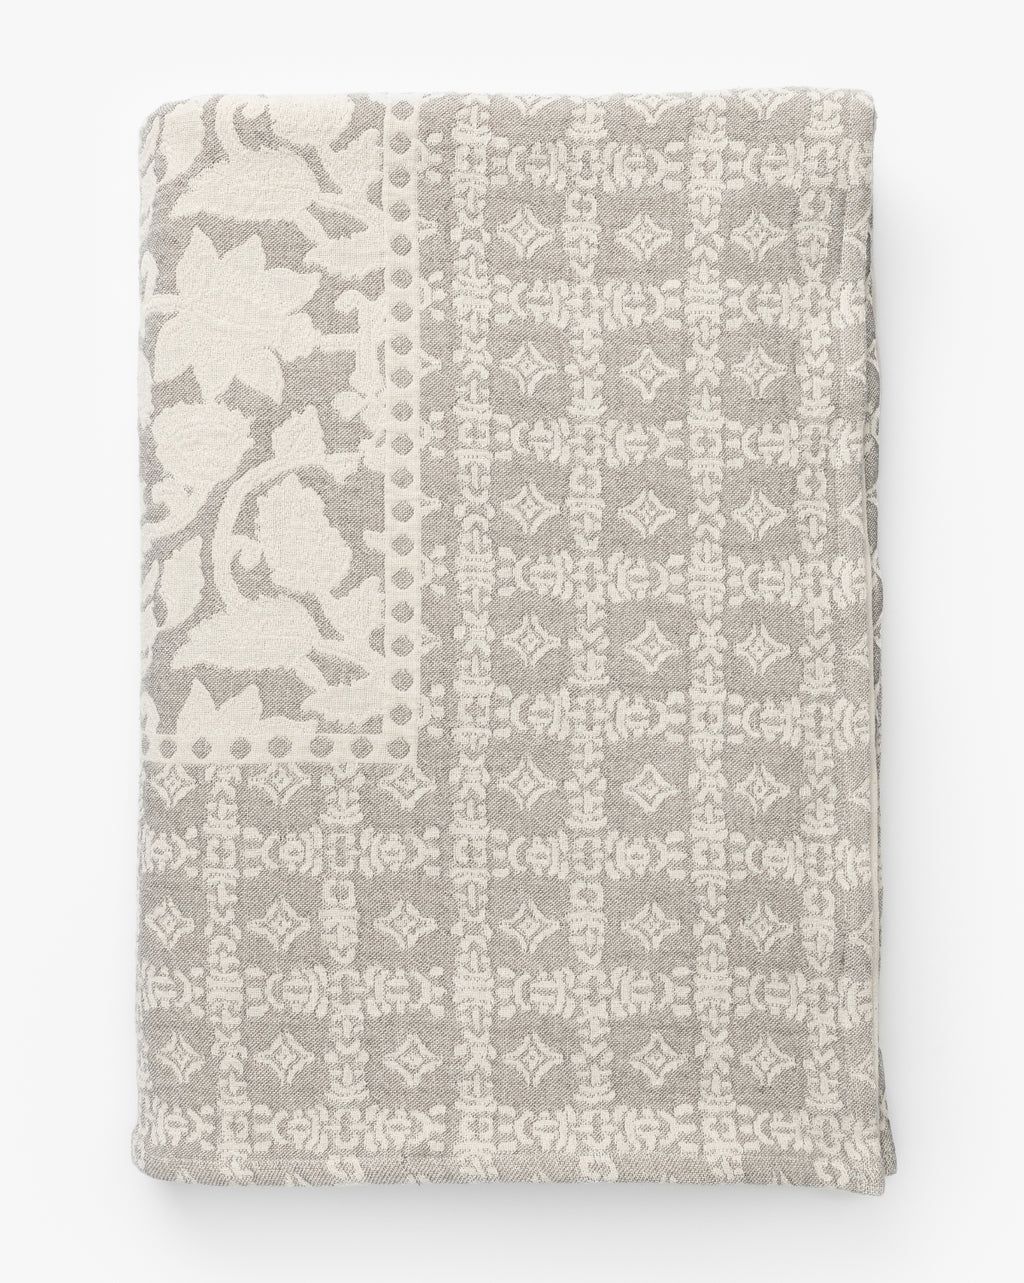 Floral Mattelasse Coverlet | McGee & Co.